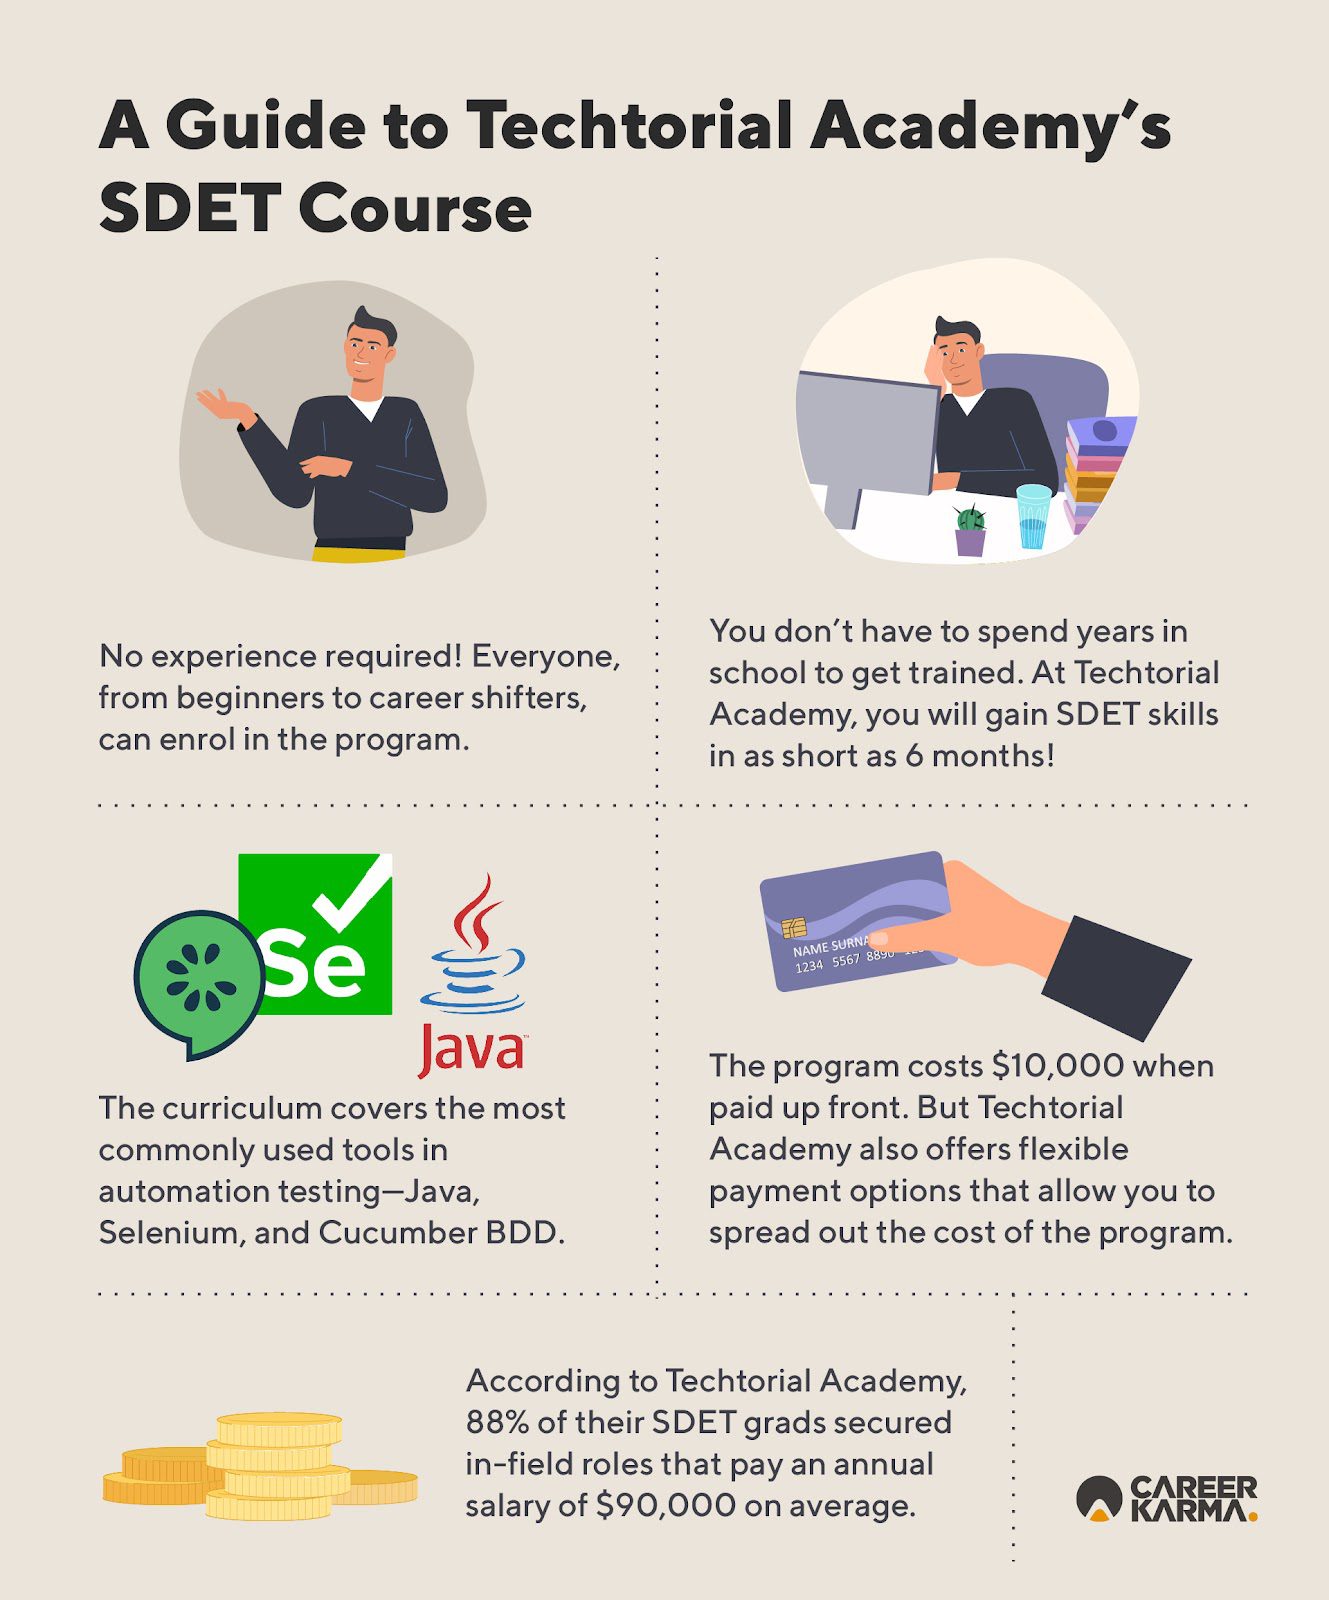 An infographic highlighting key features of Techtorial Academy’s SDET course